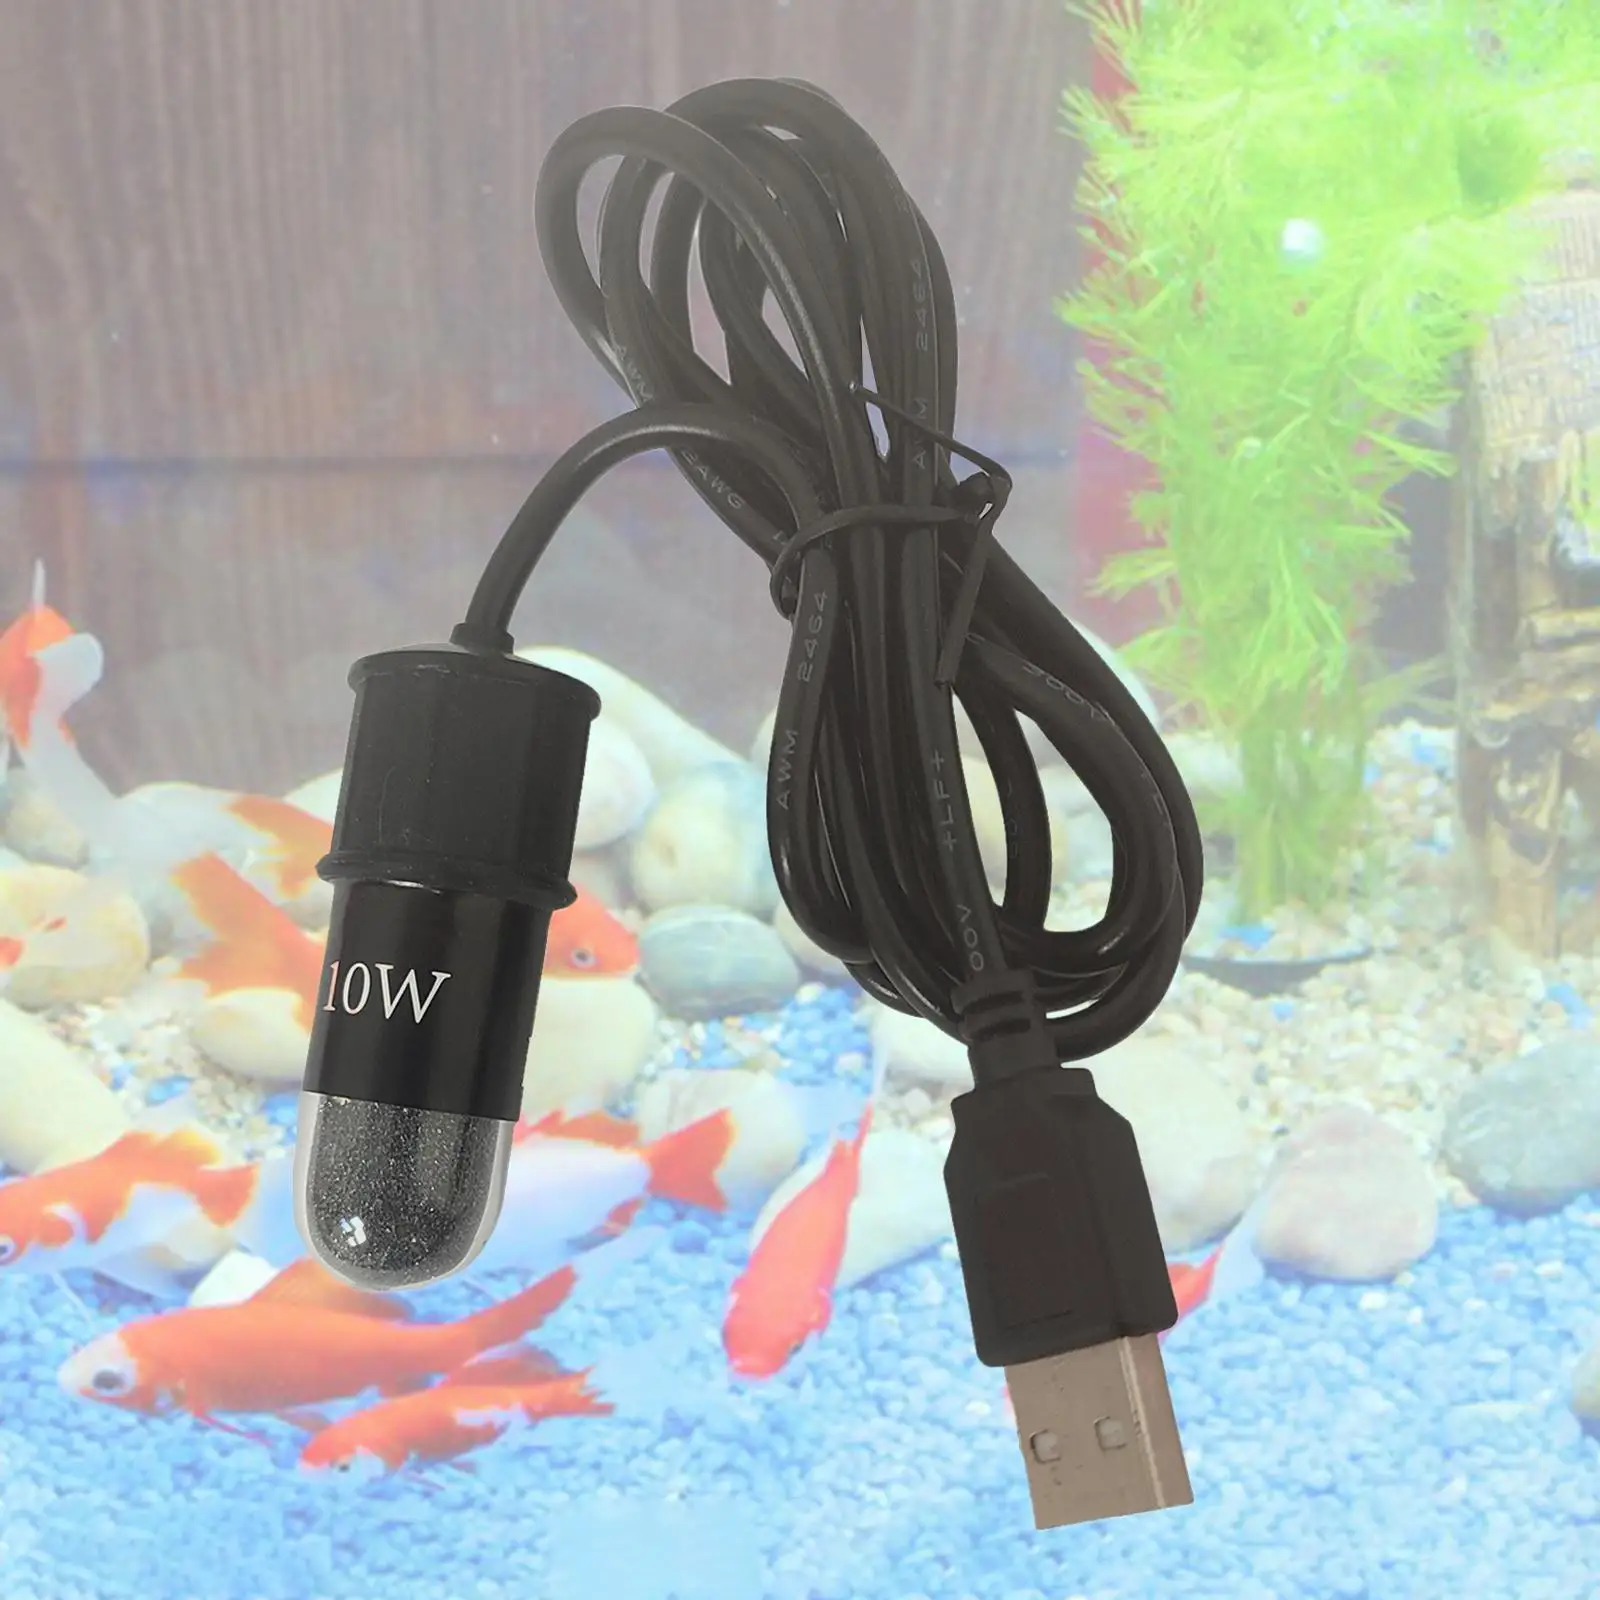 10W  Heater ,LED Display for 5/10/20 gallons, Tank Heater,Fish Turtle Tank Heater Protection